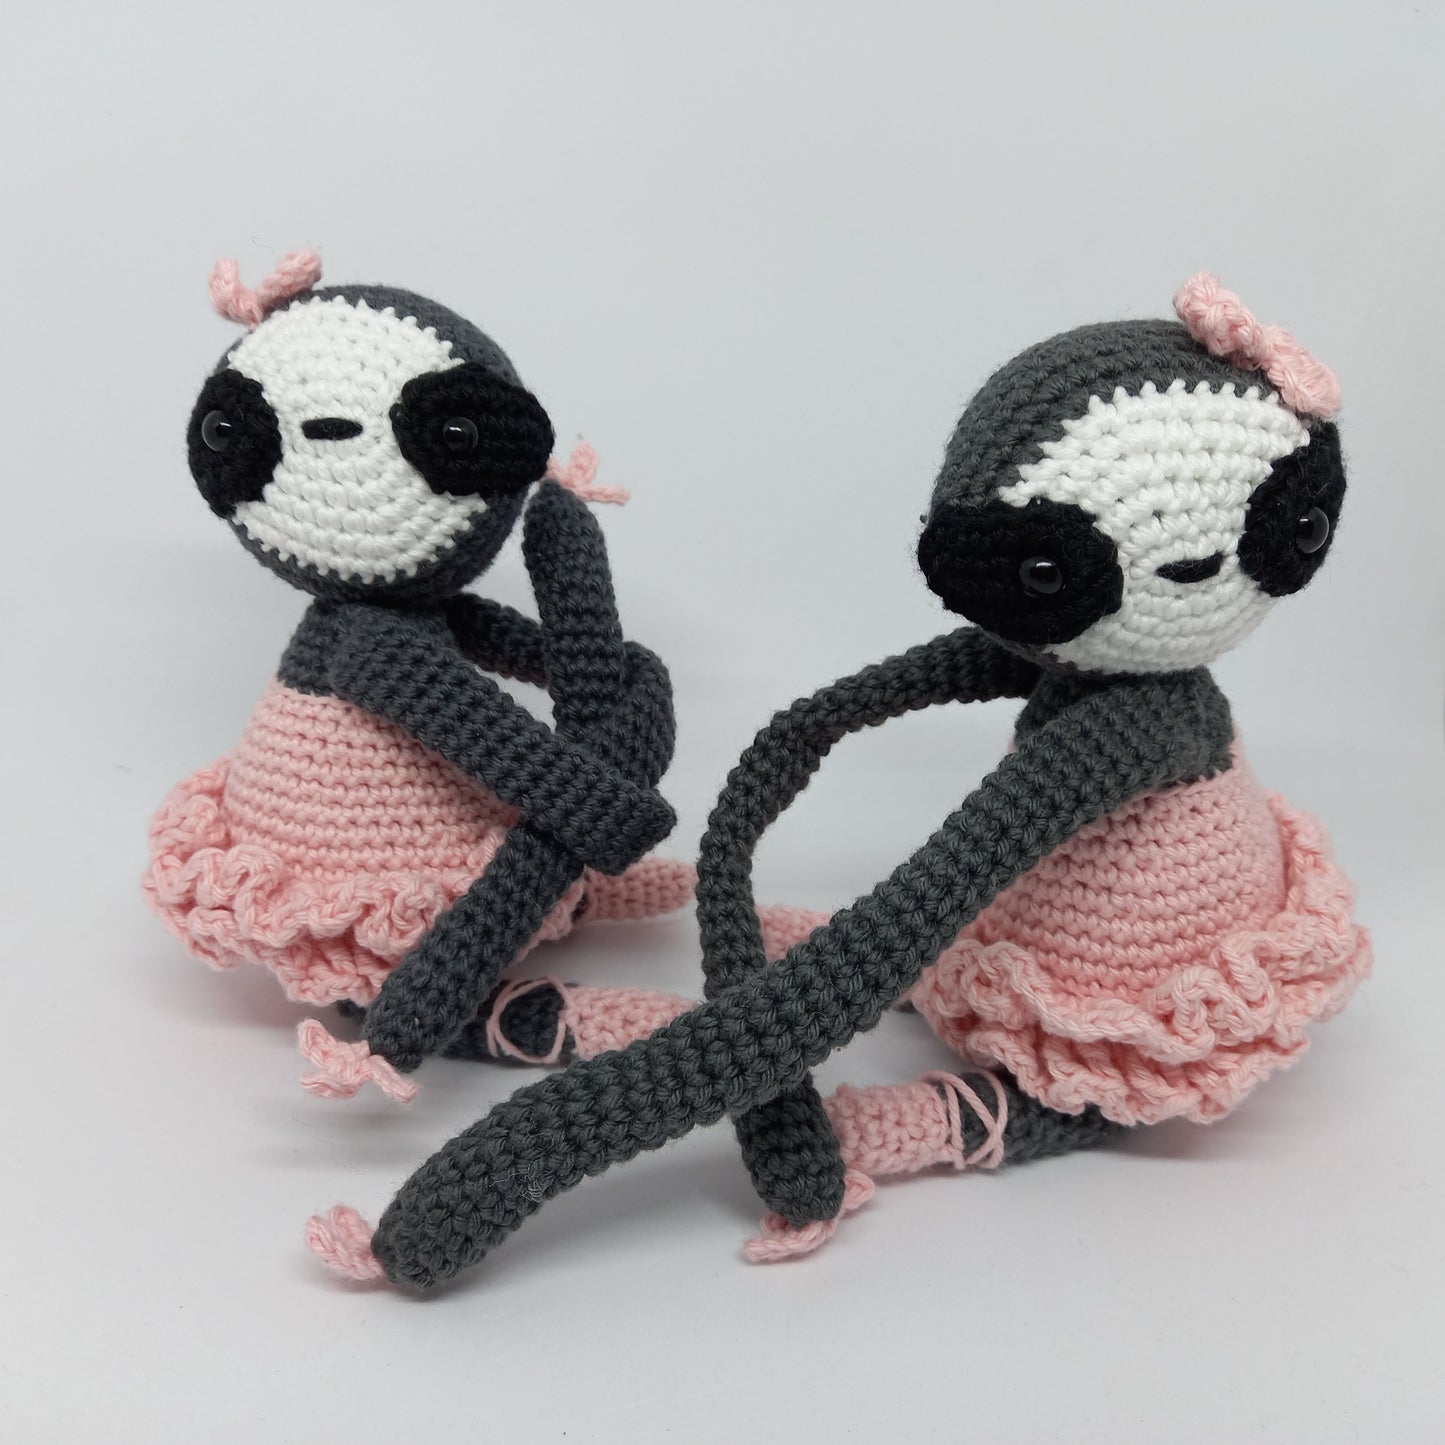 Crocheted Critters